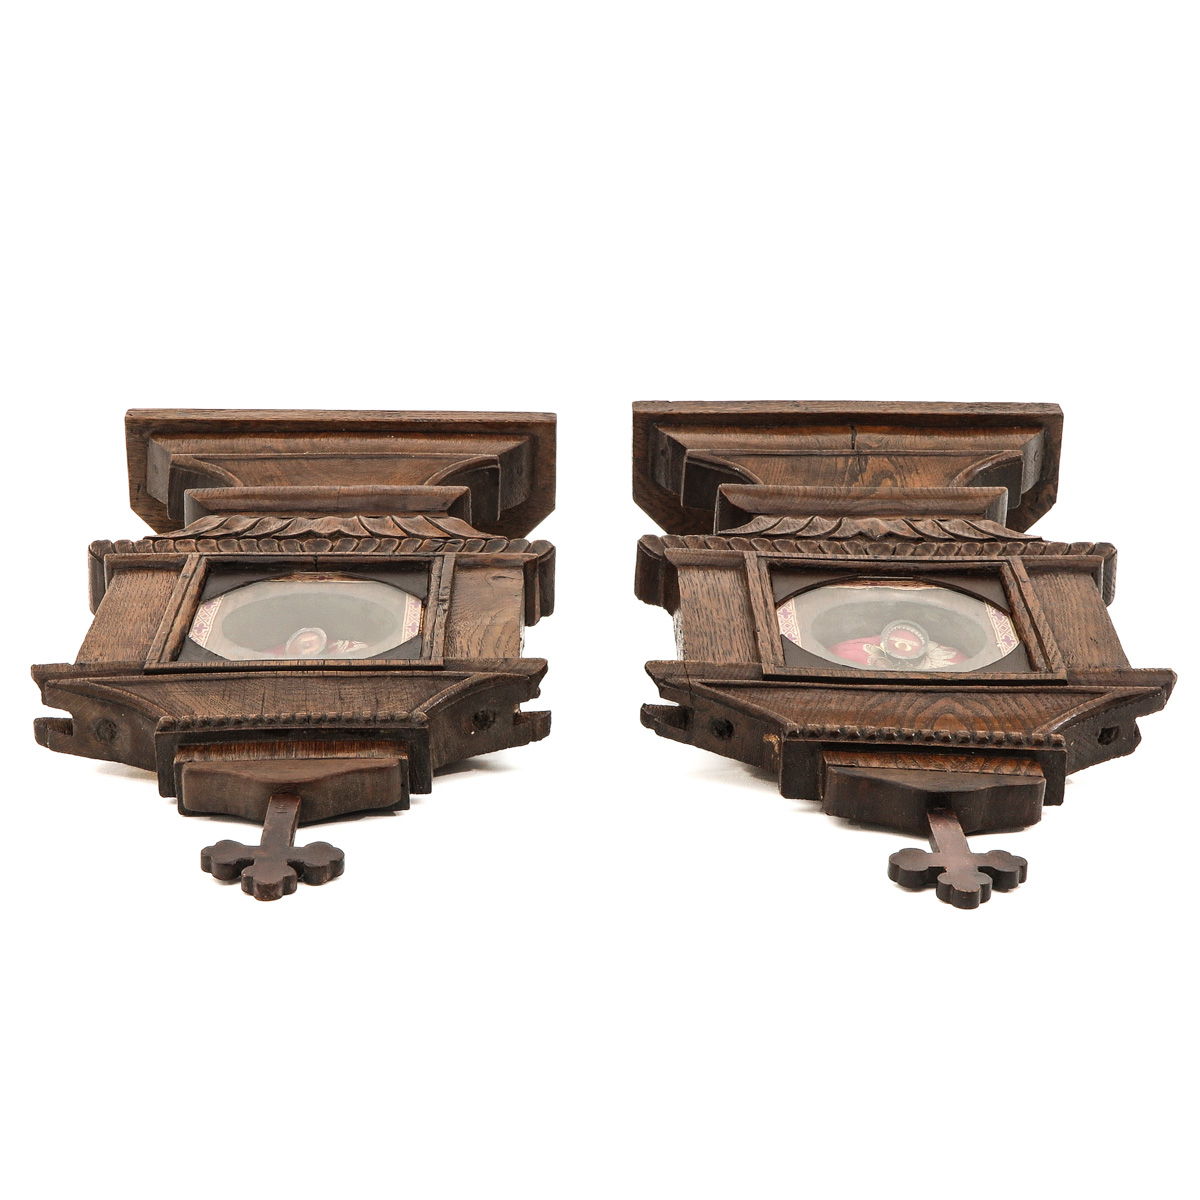 A Pair of Wood Reliquaries - Image 5 of 10